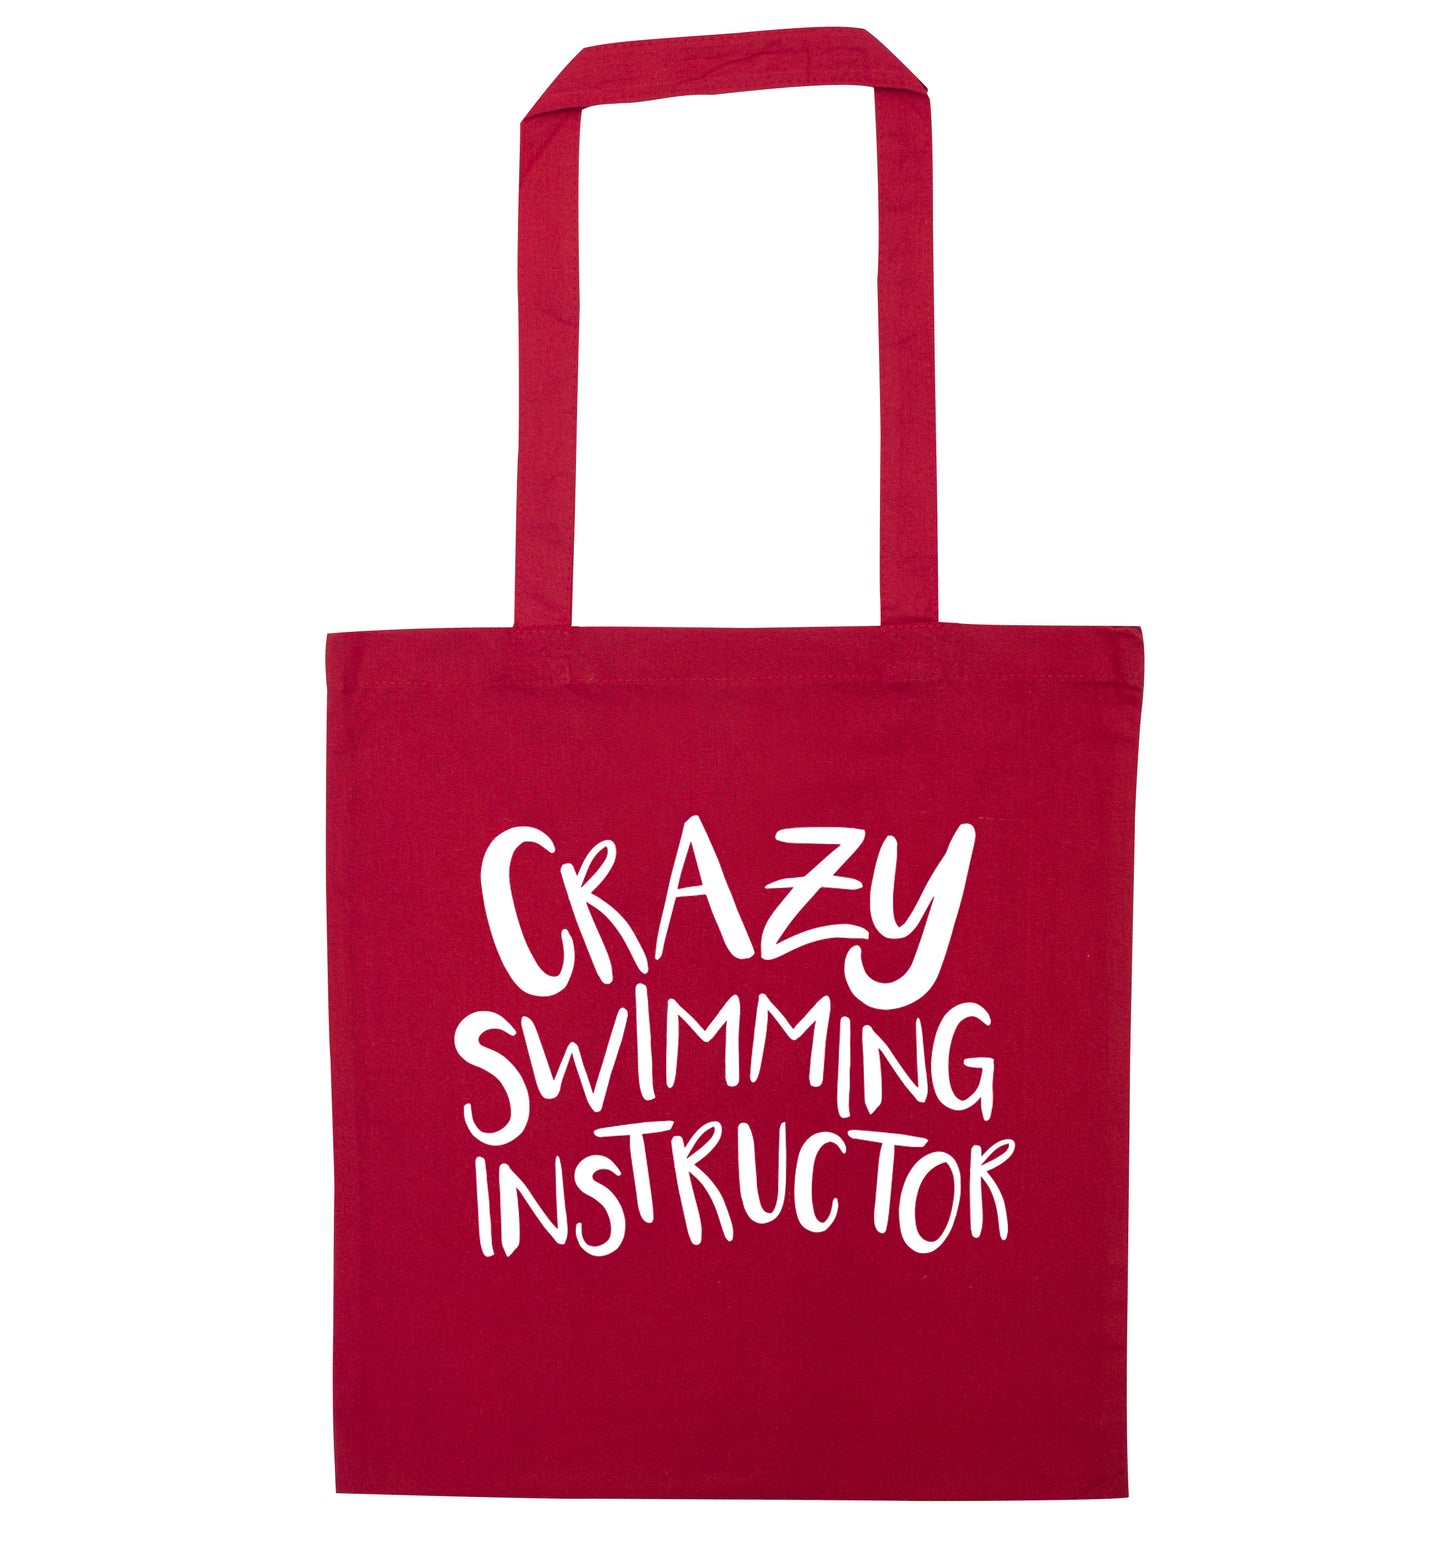 Crazy swimming instructor red tote bag